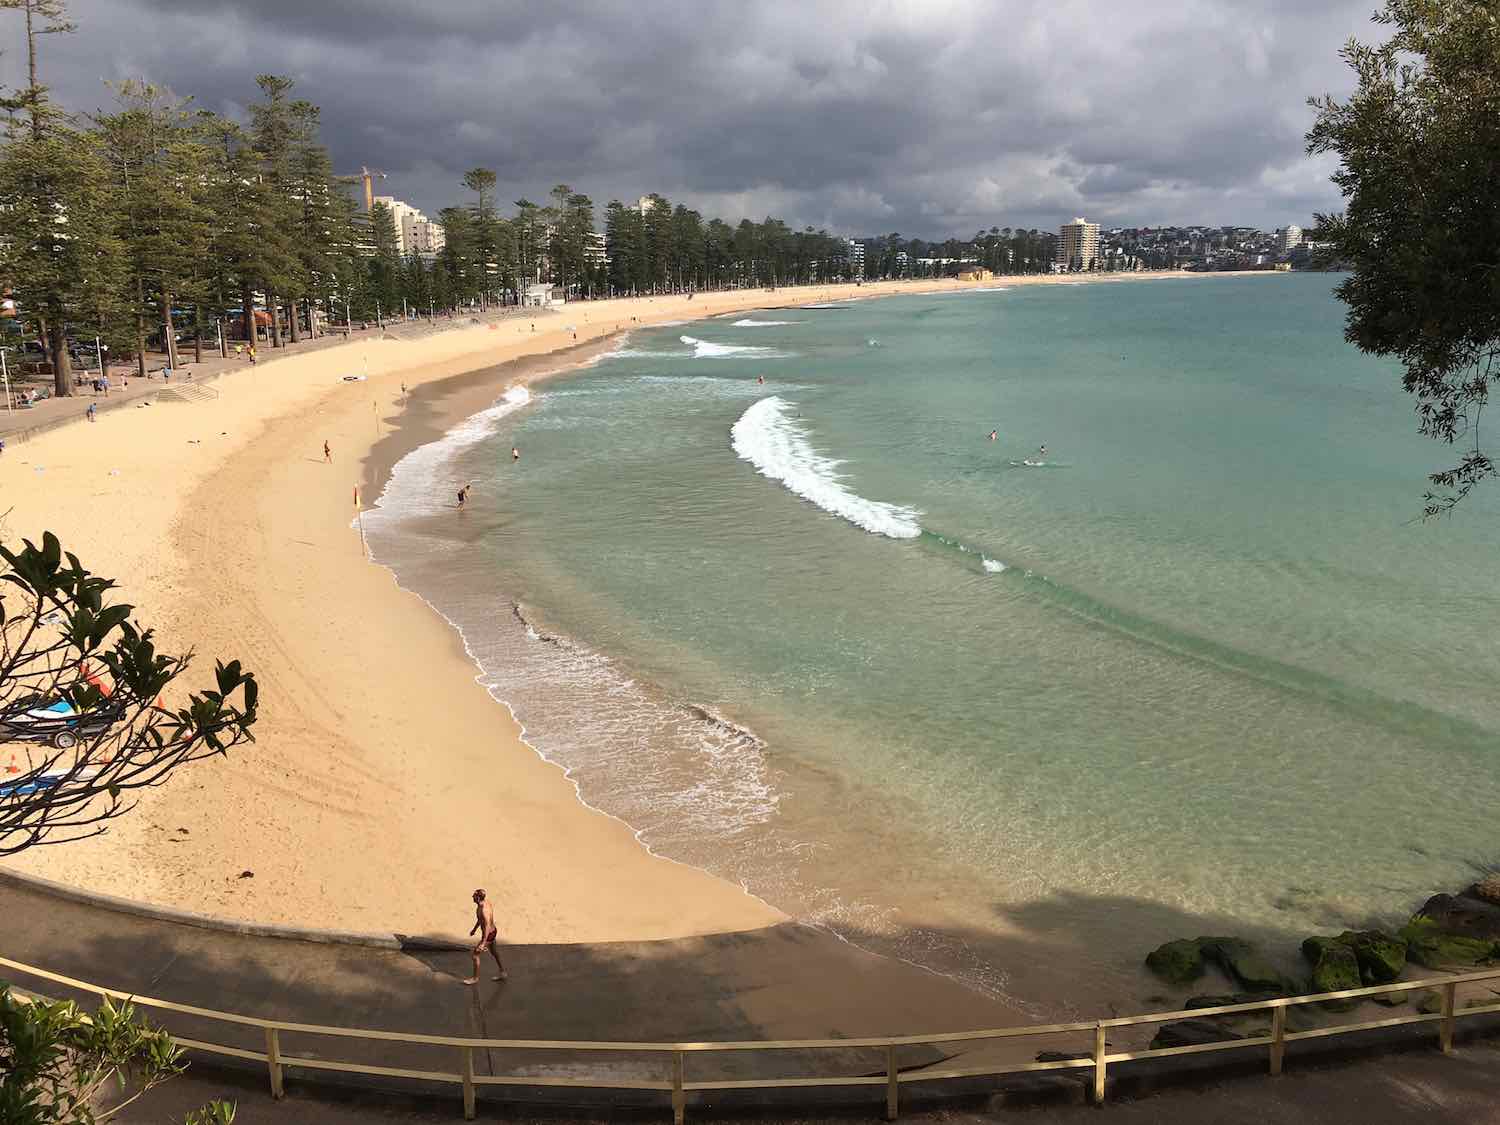 Even wth grey cloudy skies, a swim at Manly beach looks appealing!